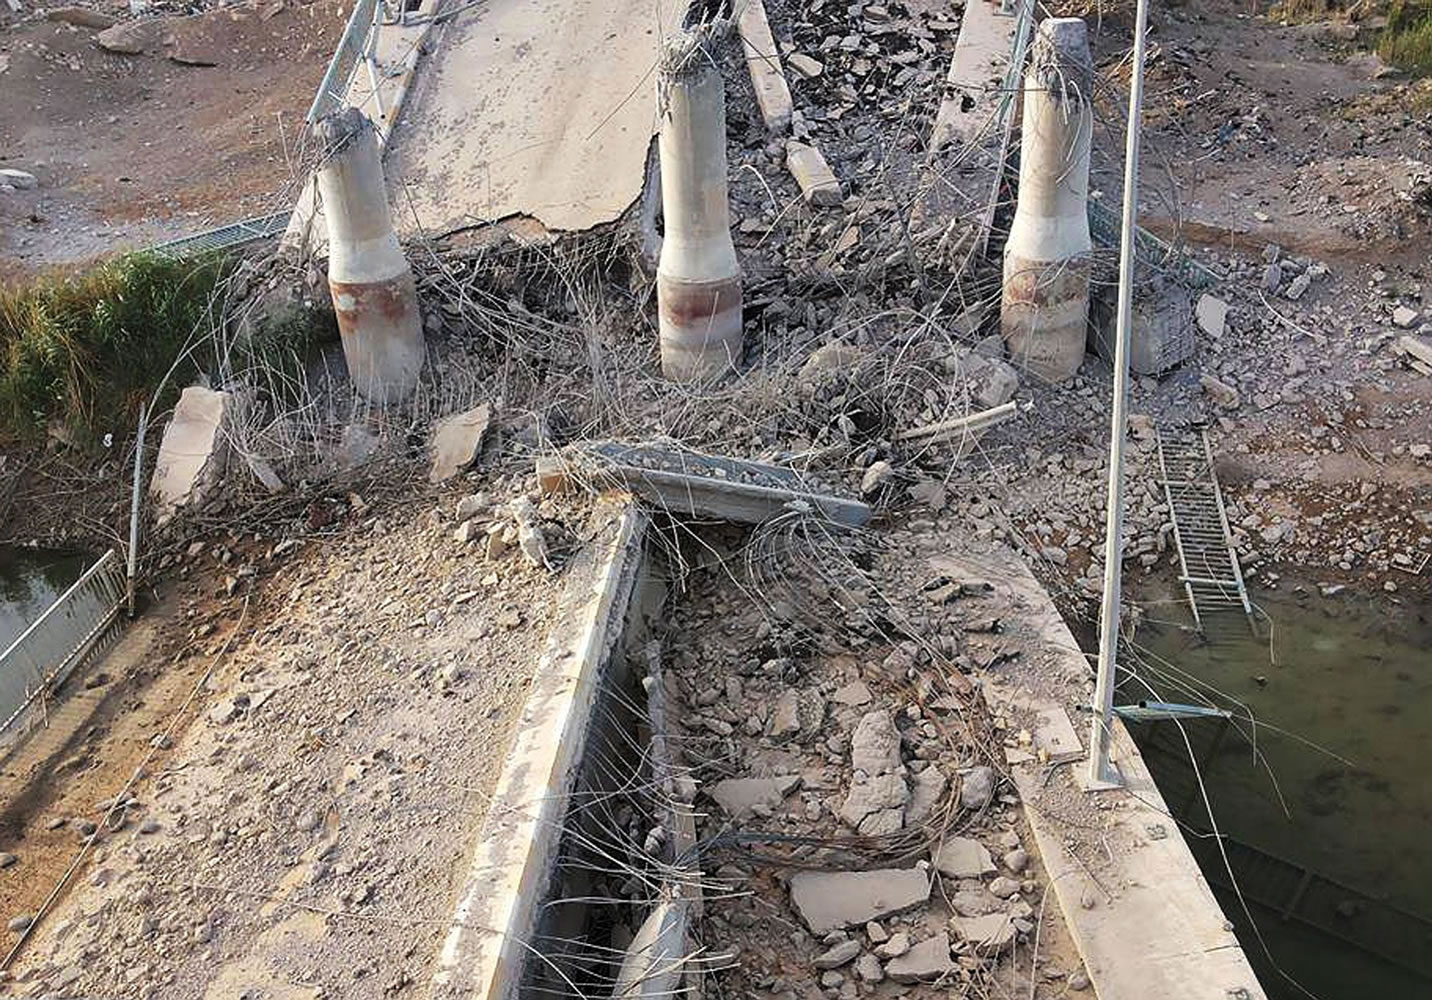 Associated Press
A destroyed bridge over the Euphrates River is shown Wednesday in northern Ramadi, Iraq. The Islamic State group destroyed the bridge with a car bomb to cut the northern entrance to the city, locals said.